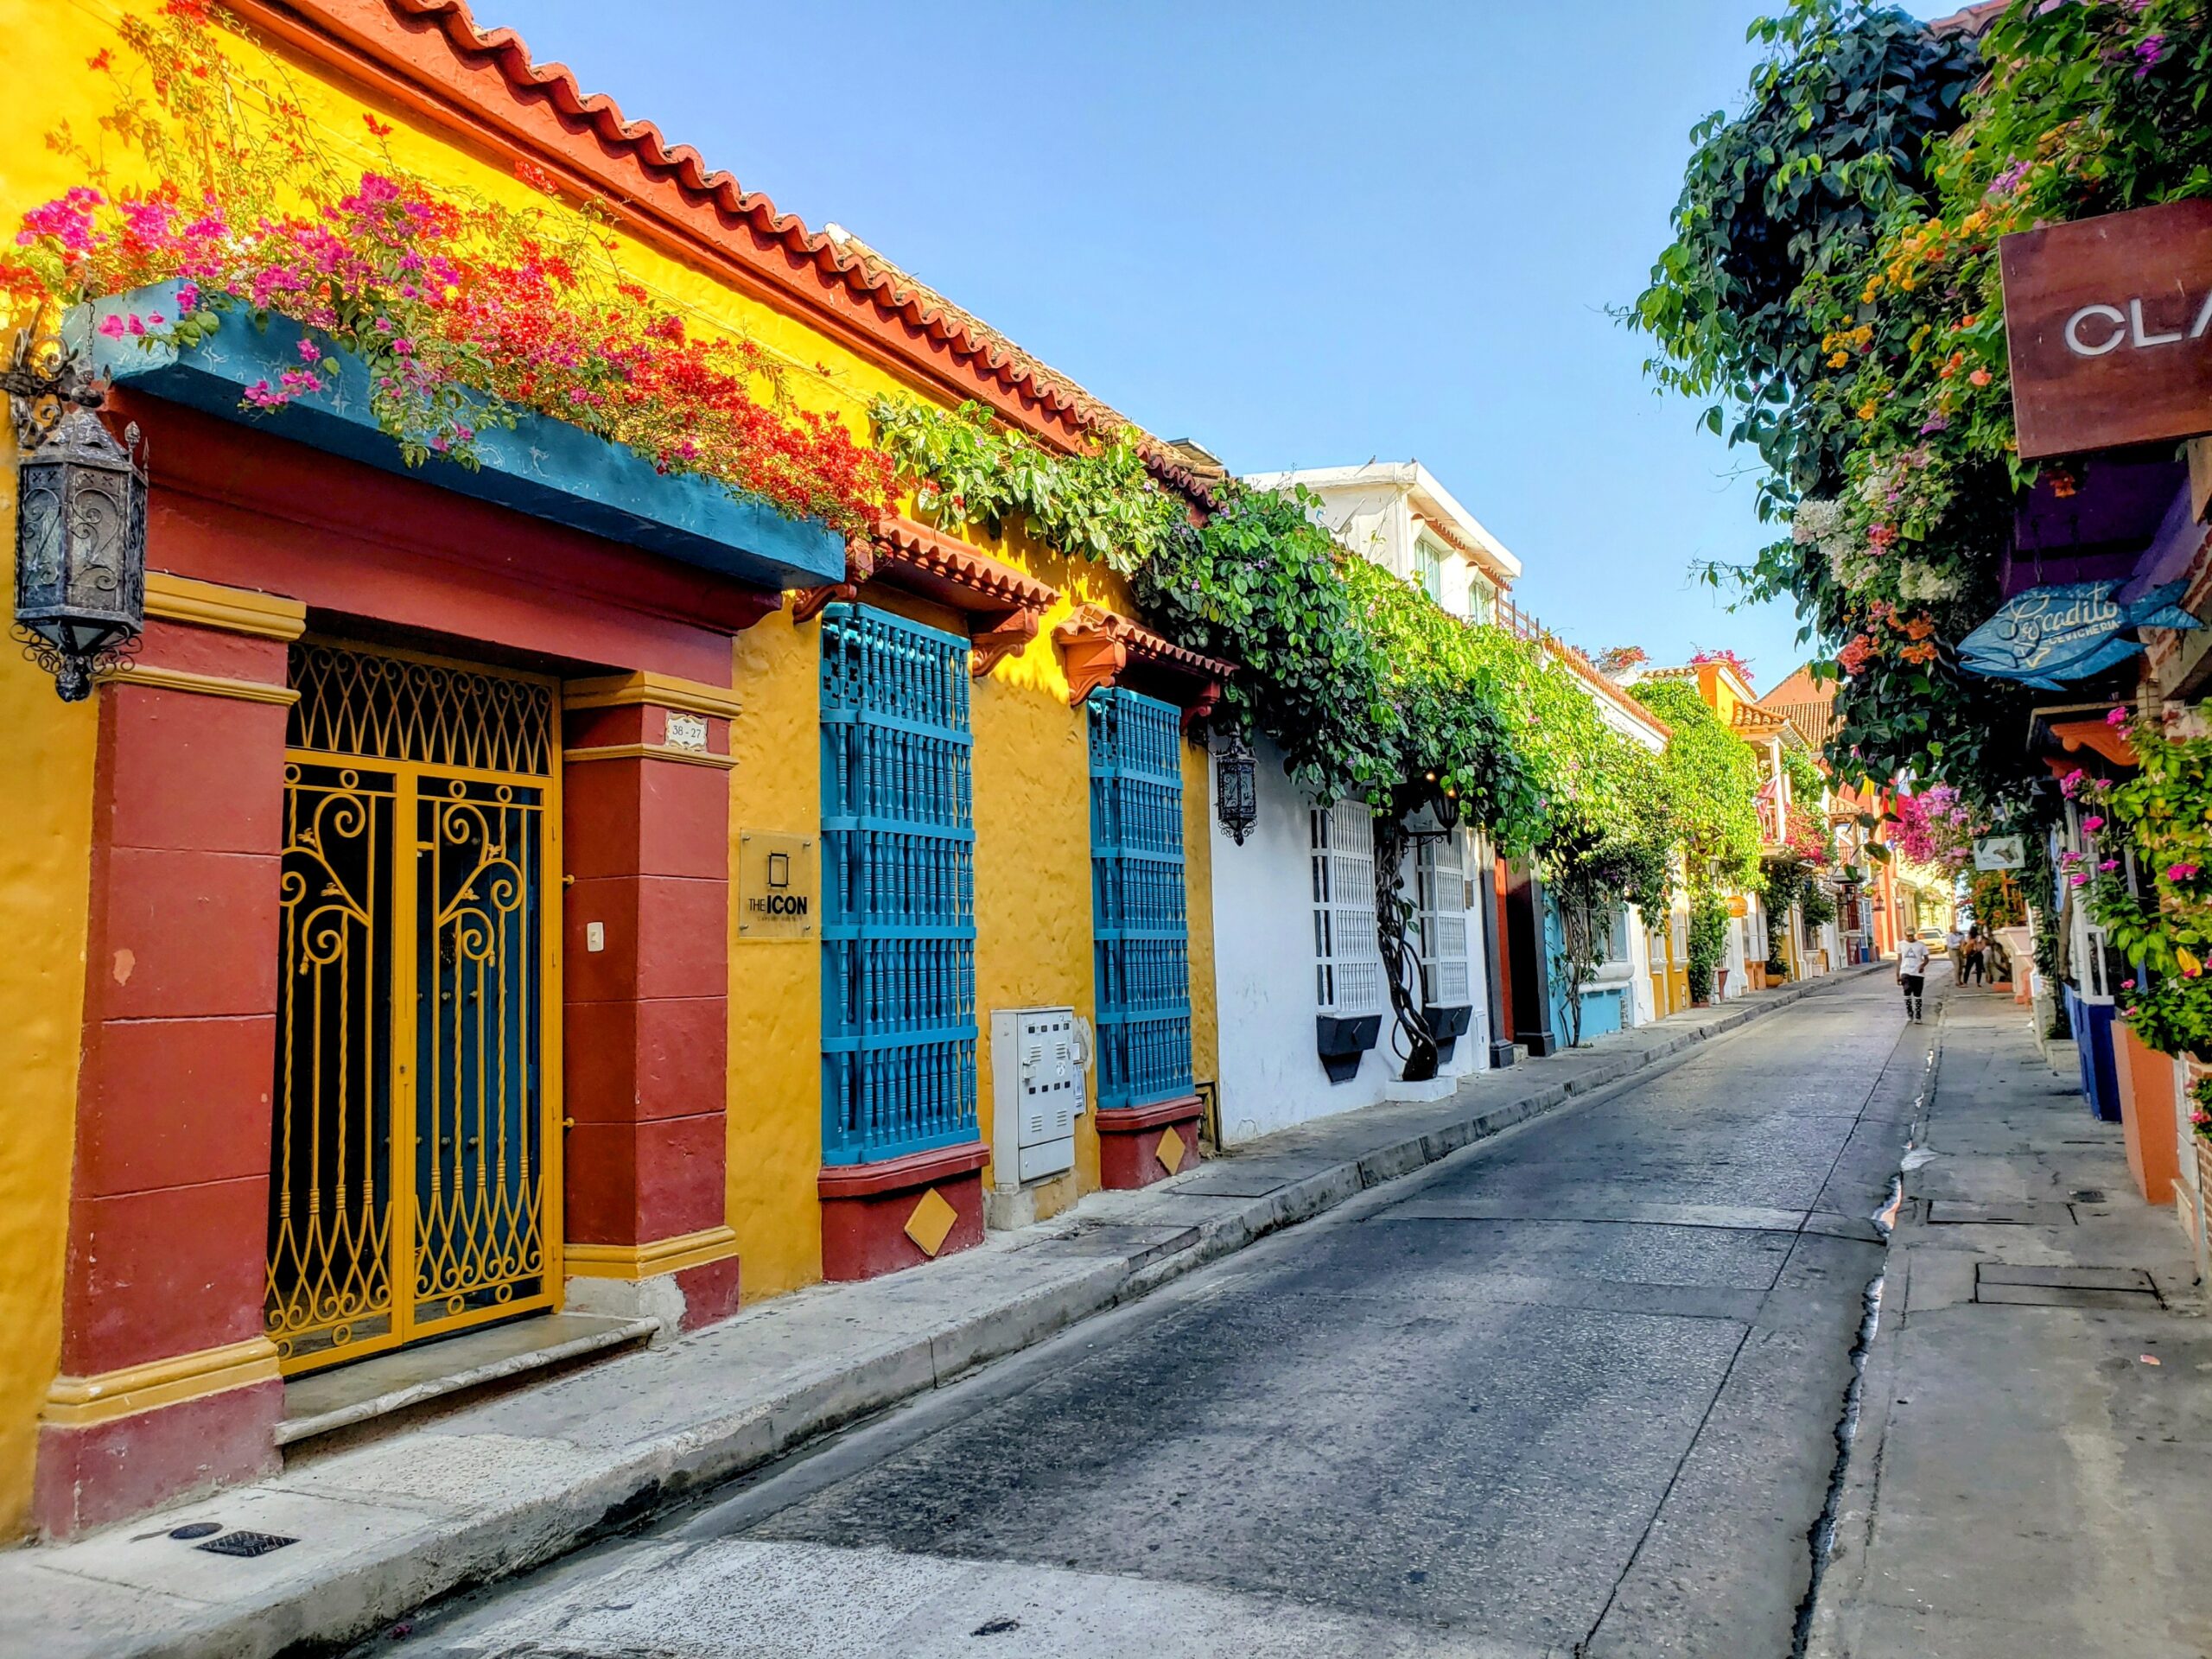 Cartagena, Colombia (Photo Credit: Chris Campbell)